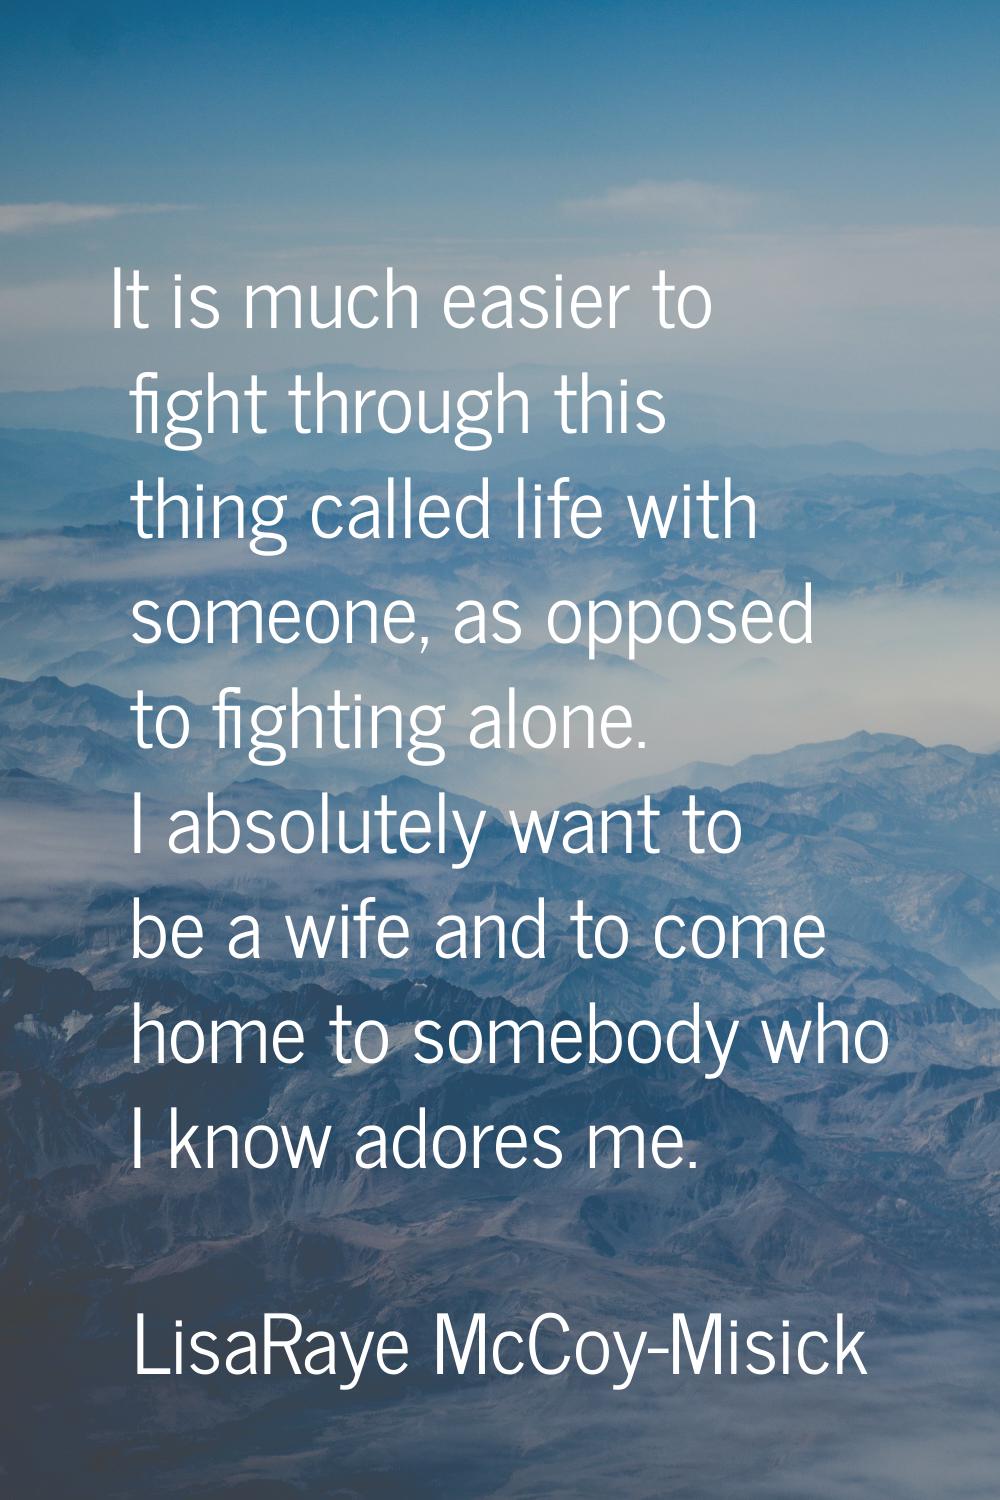 It is much easier to fight through this thing called life with someone, as opposed to fighting alon